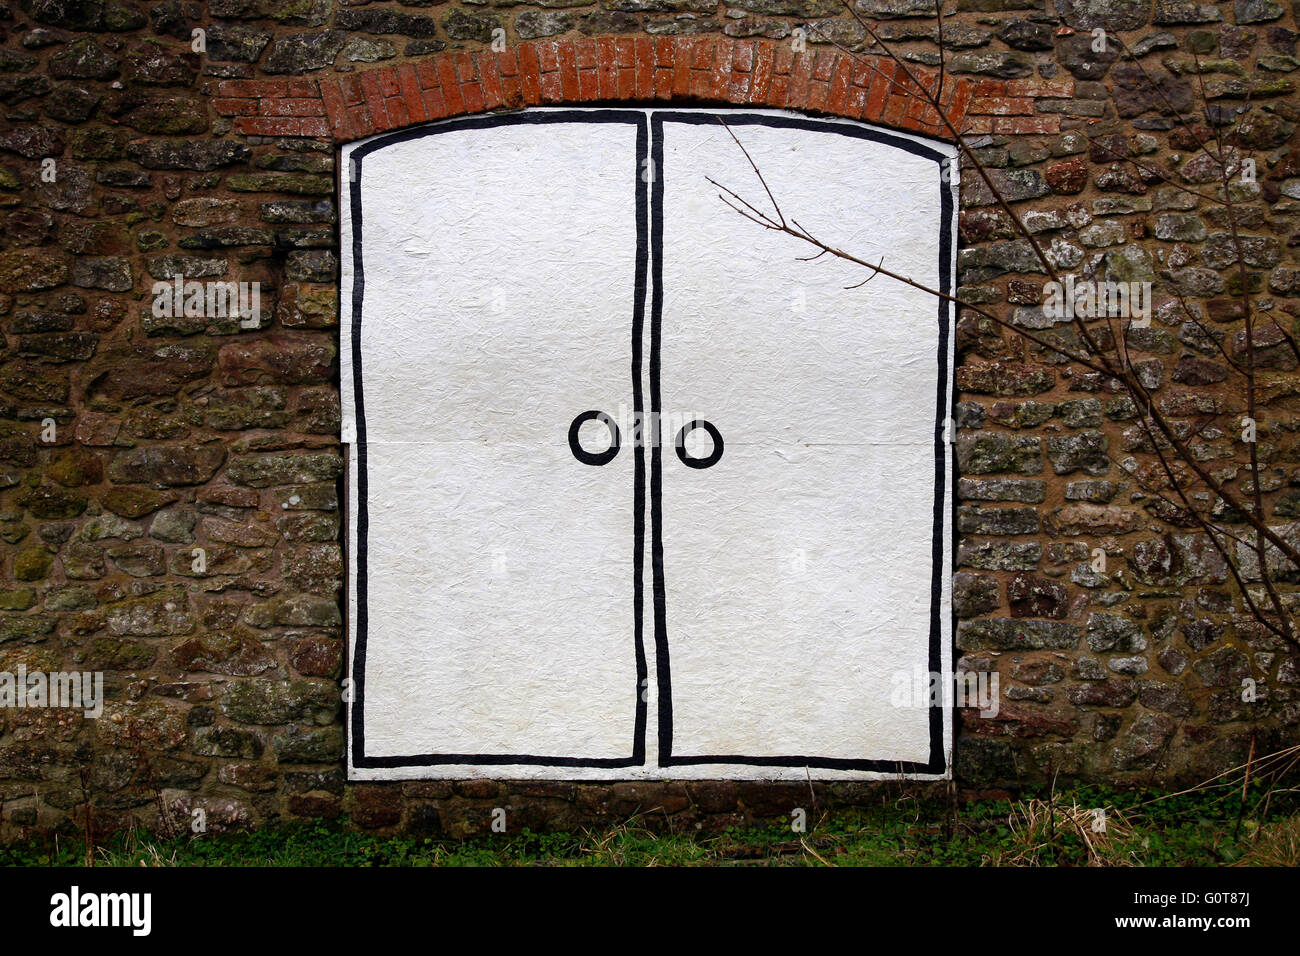 Cartoon Drawing Of Double Doors On A Boarded Up Entrance Stock Photo Alamy